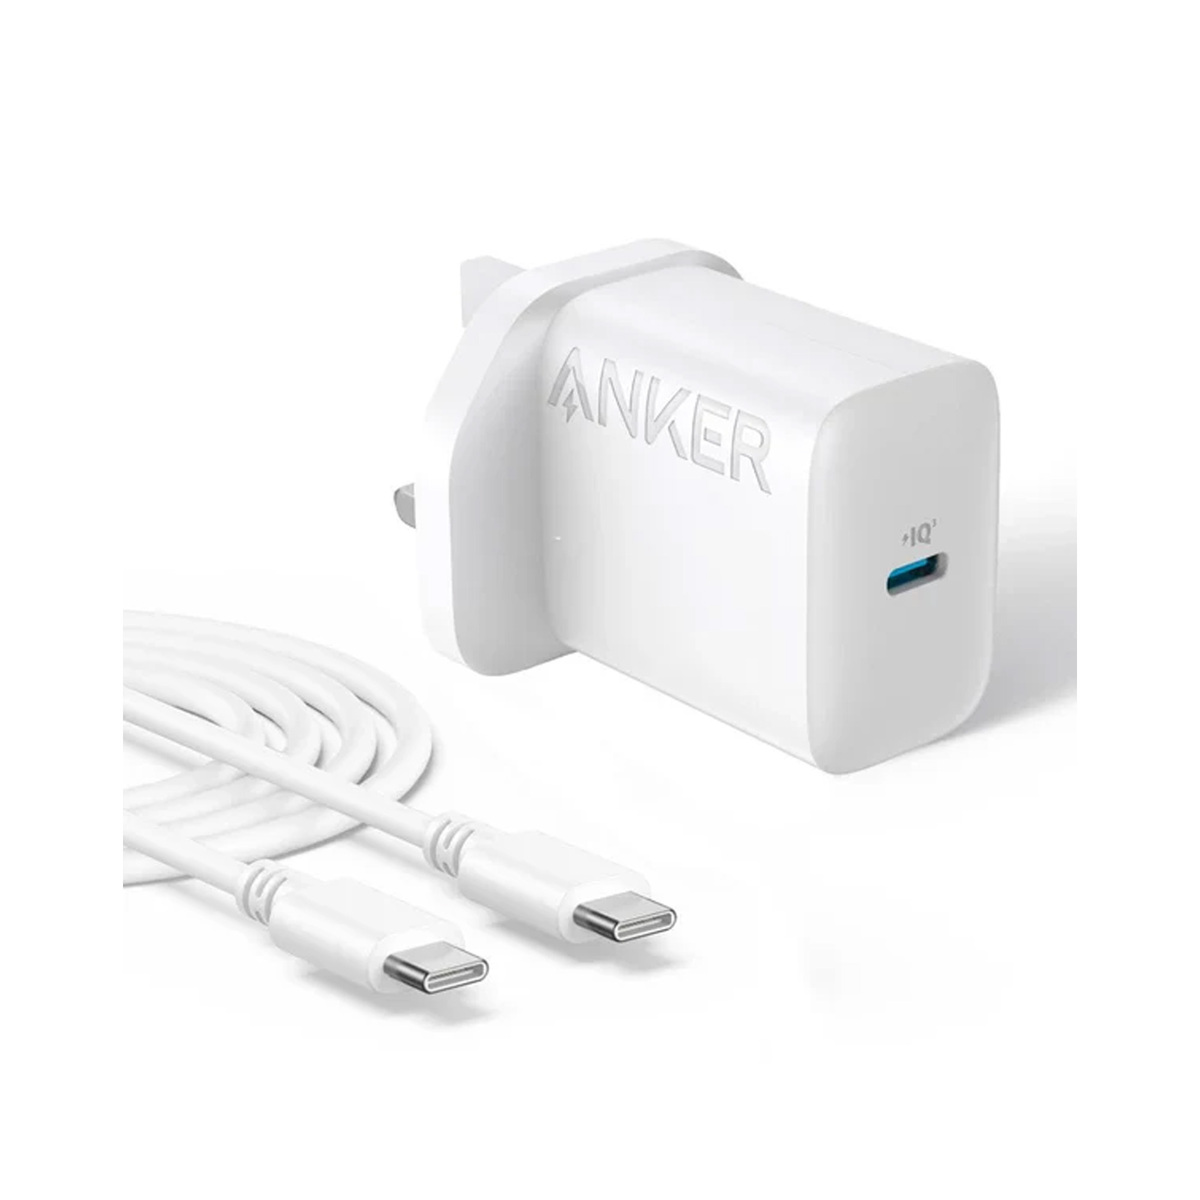 Anker Charger 20W + USB-C Cable B2347K21